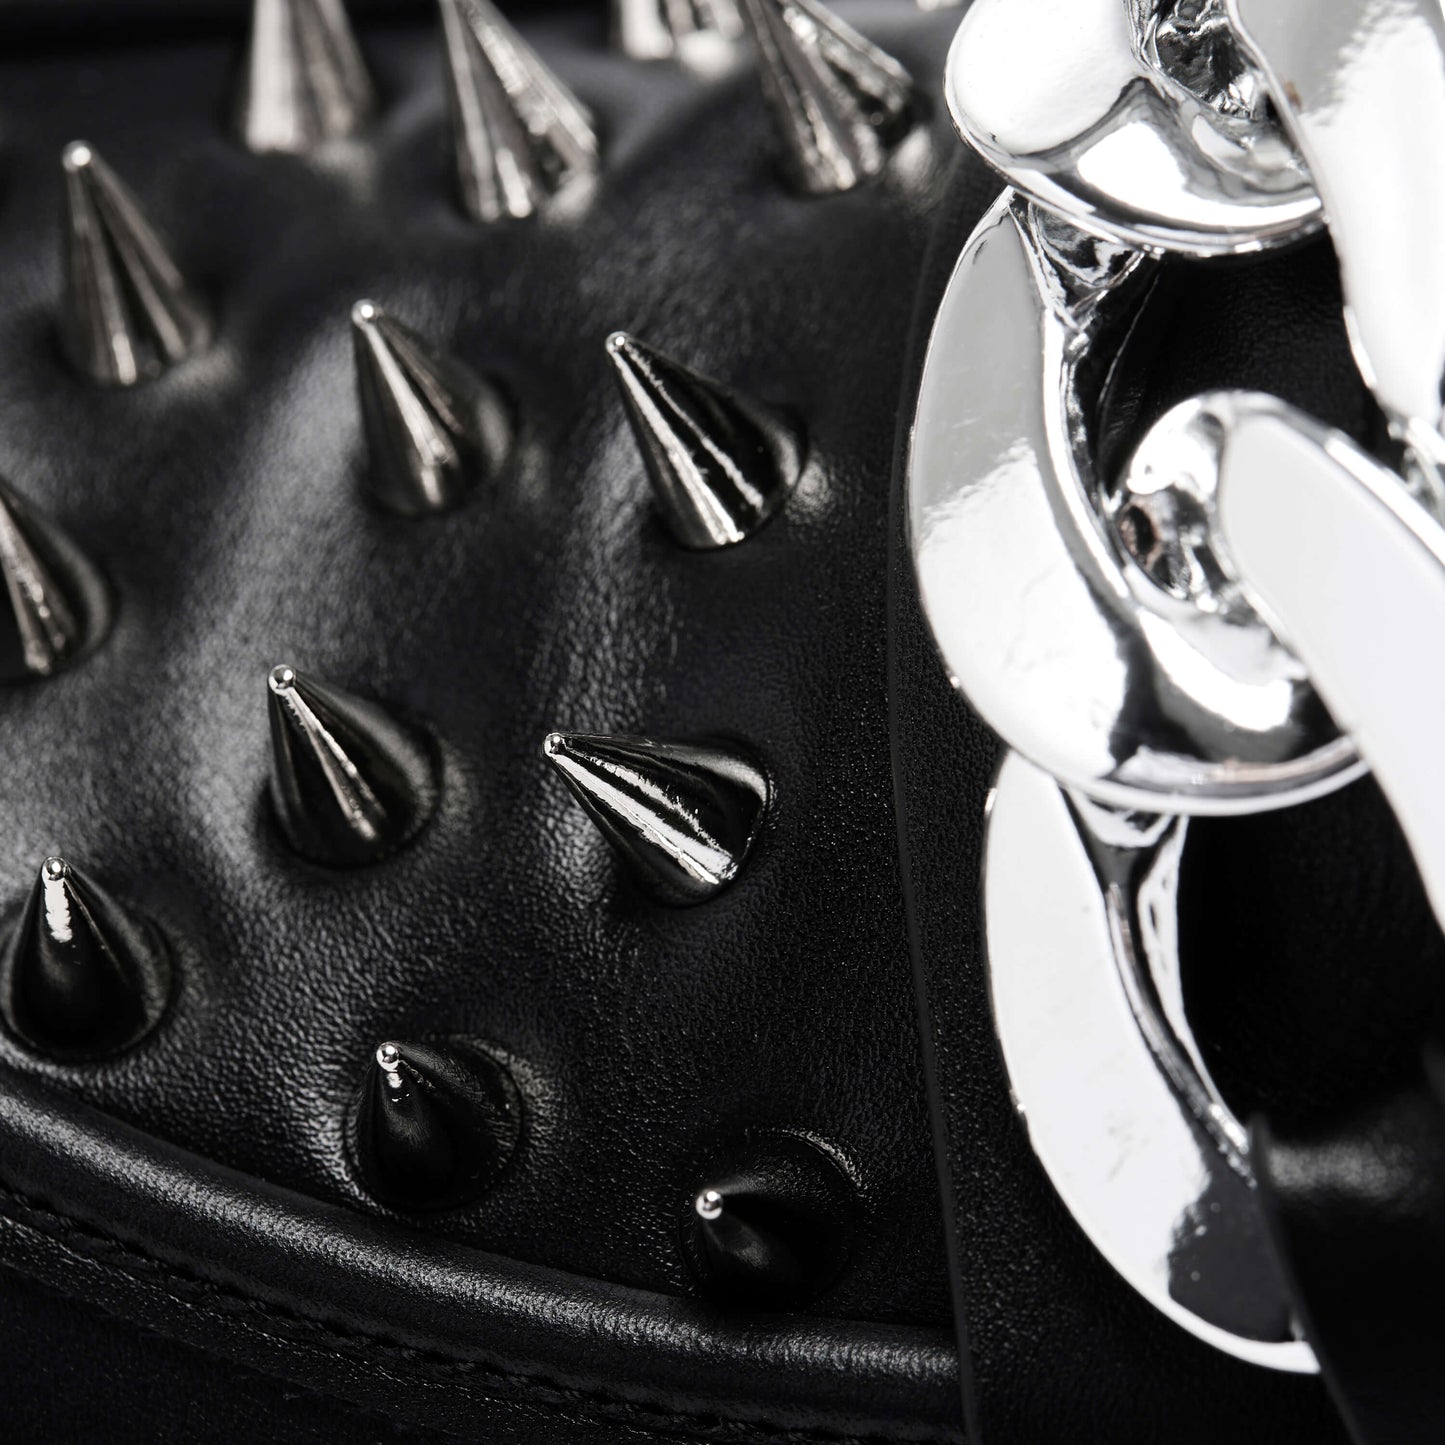 The Grave Warden Men's Spiked Loafers - Shoes - KOI Footwear - Black - Spikes Detail